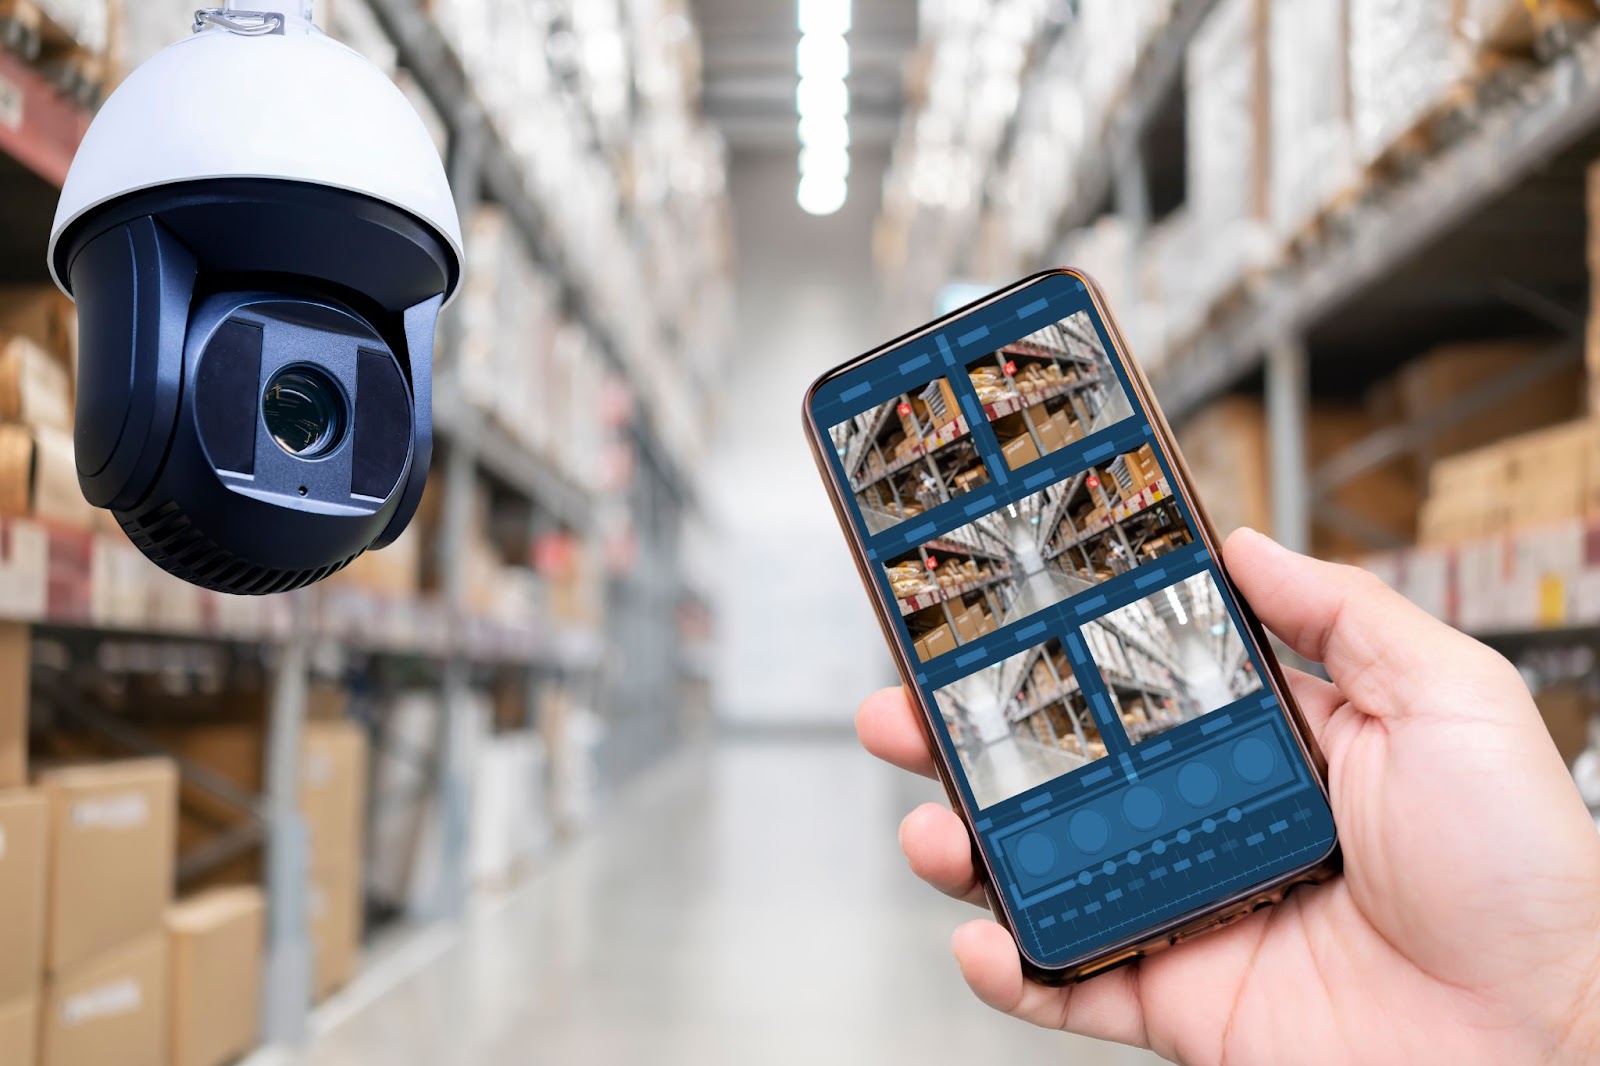 Security camera monitoring warehouse aisle with live feed displayed on a smartphone, enhancing warehouse security.